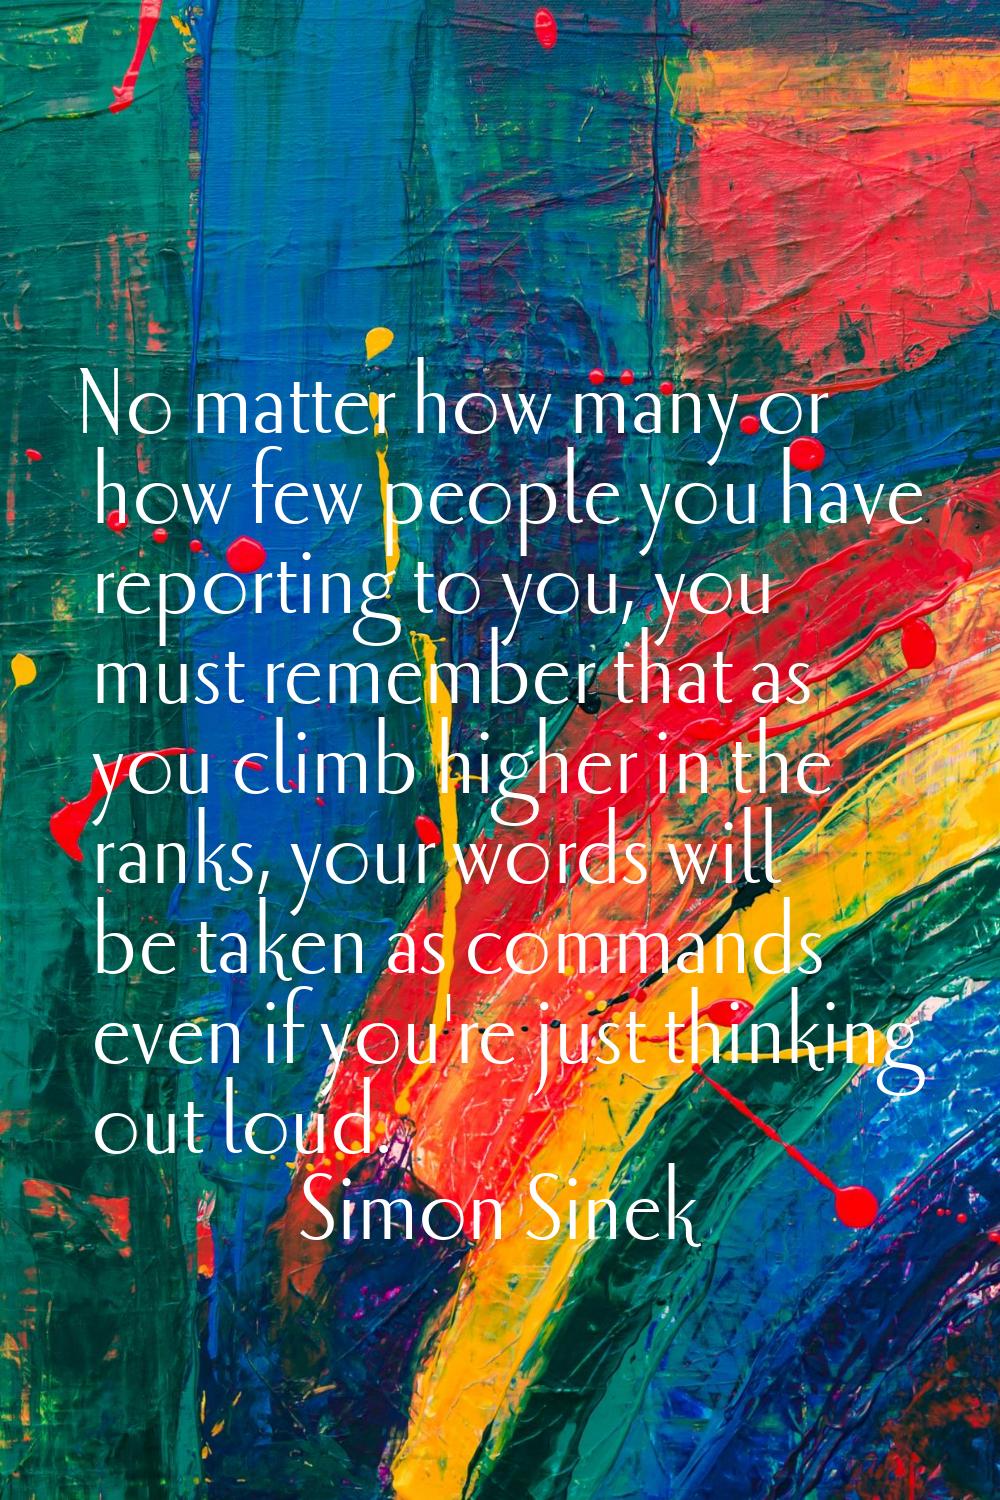 No matter how many or how few people you have reporting to you, you must remember that as you climb